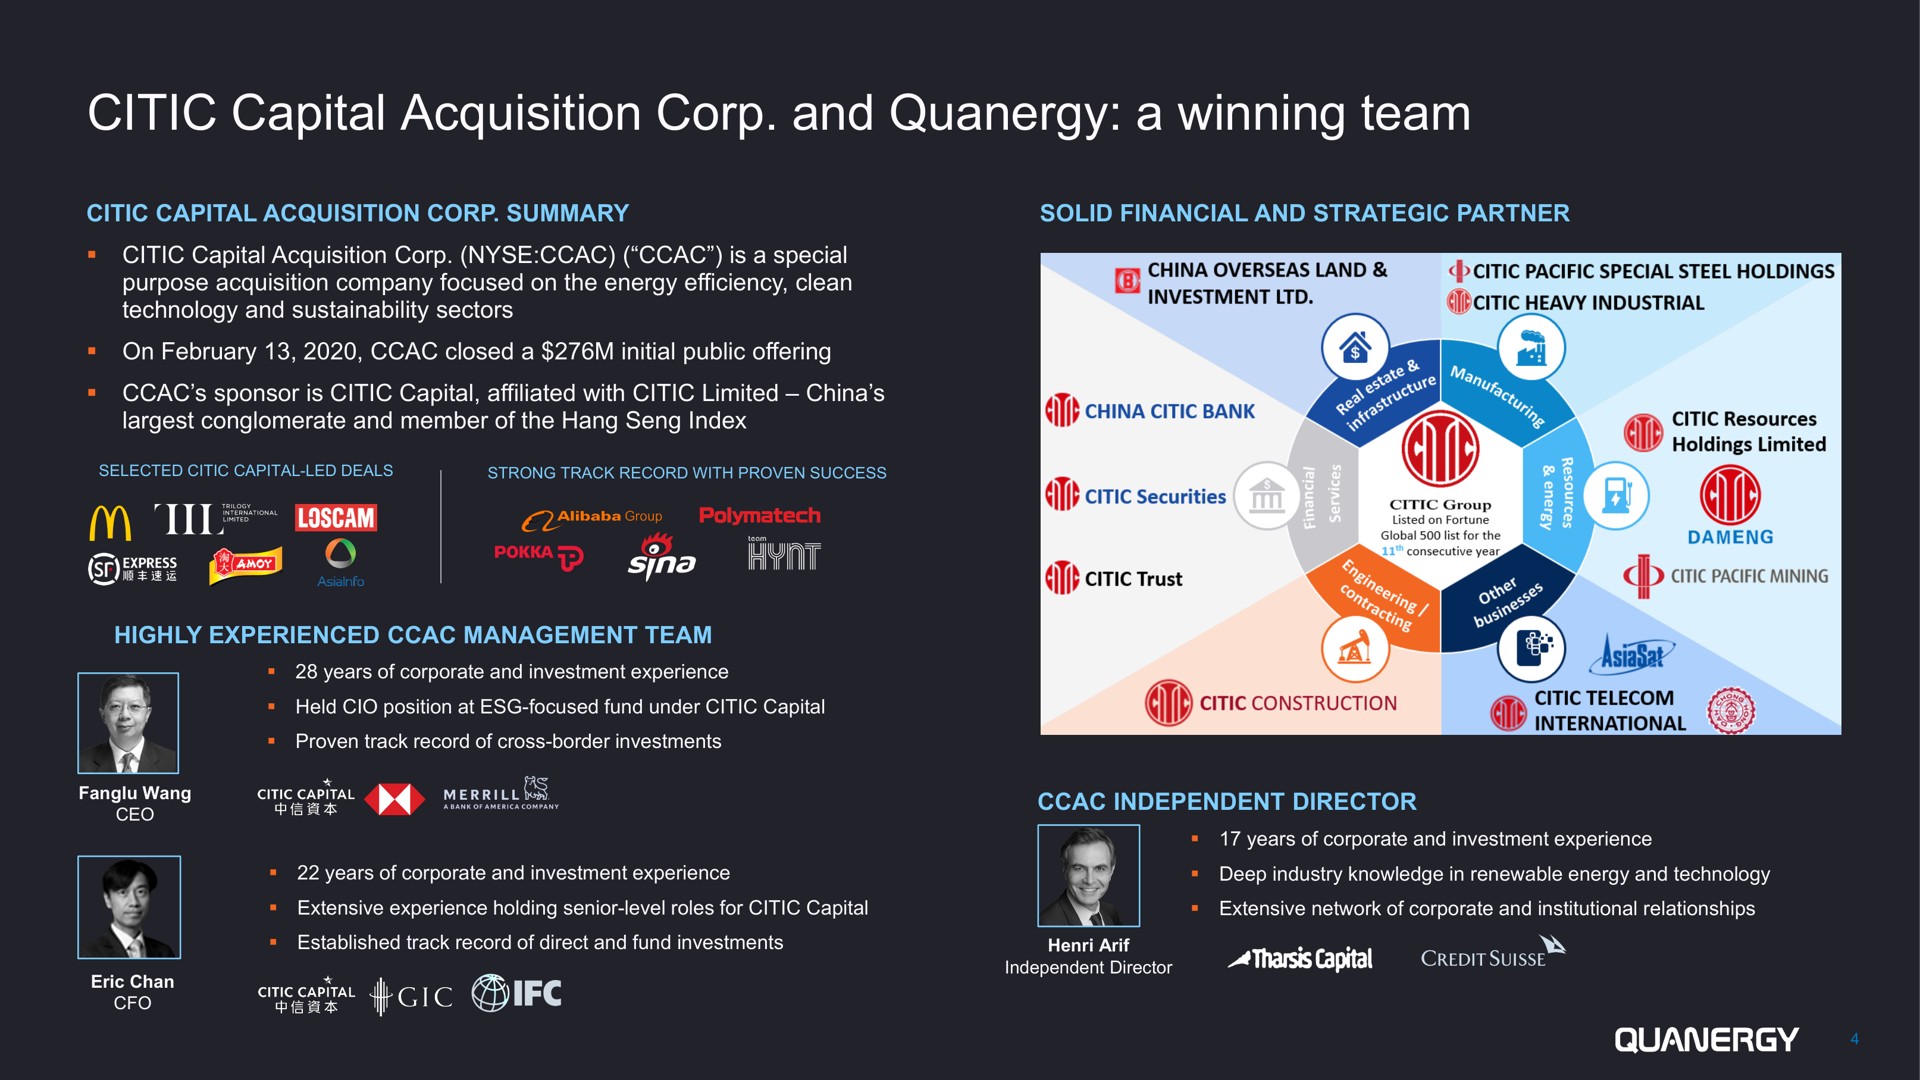 capital acquisition corp and a winning team ave guess commas | Quanergy